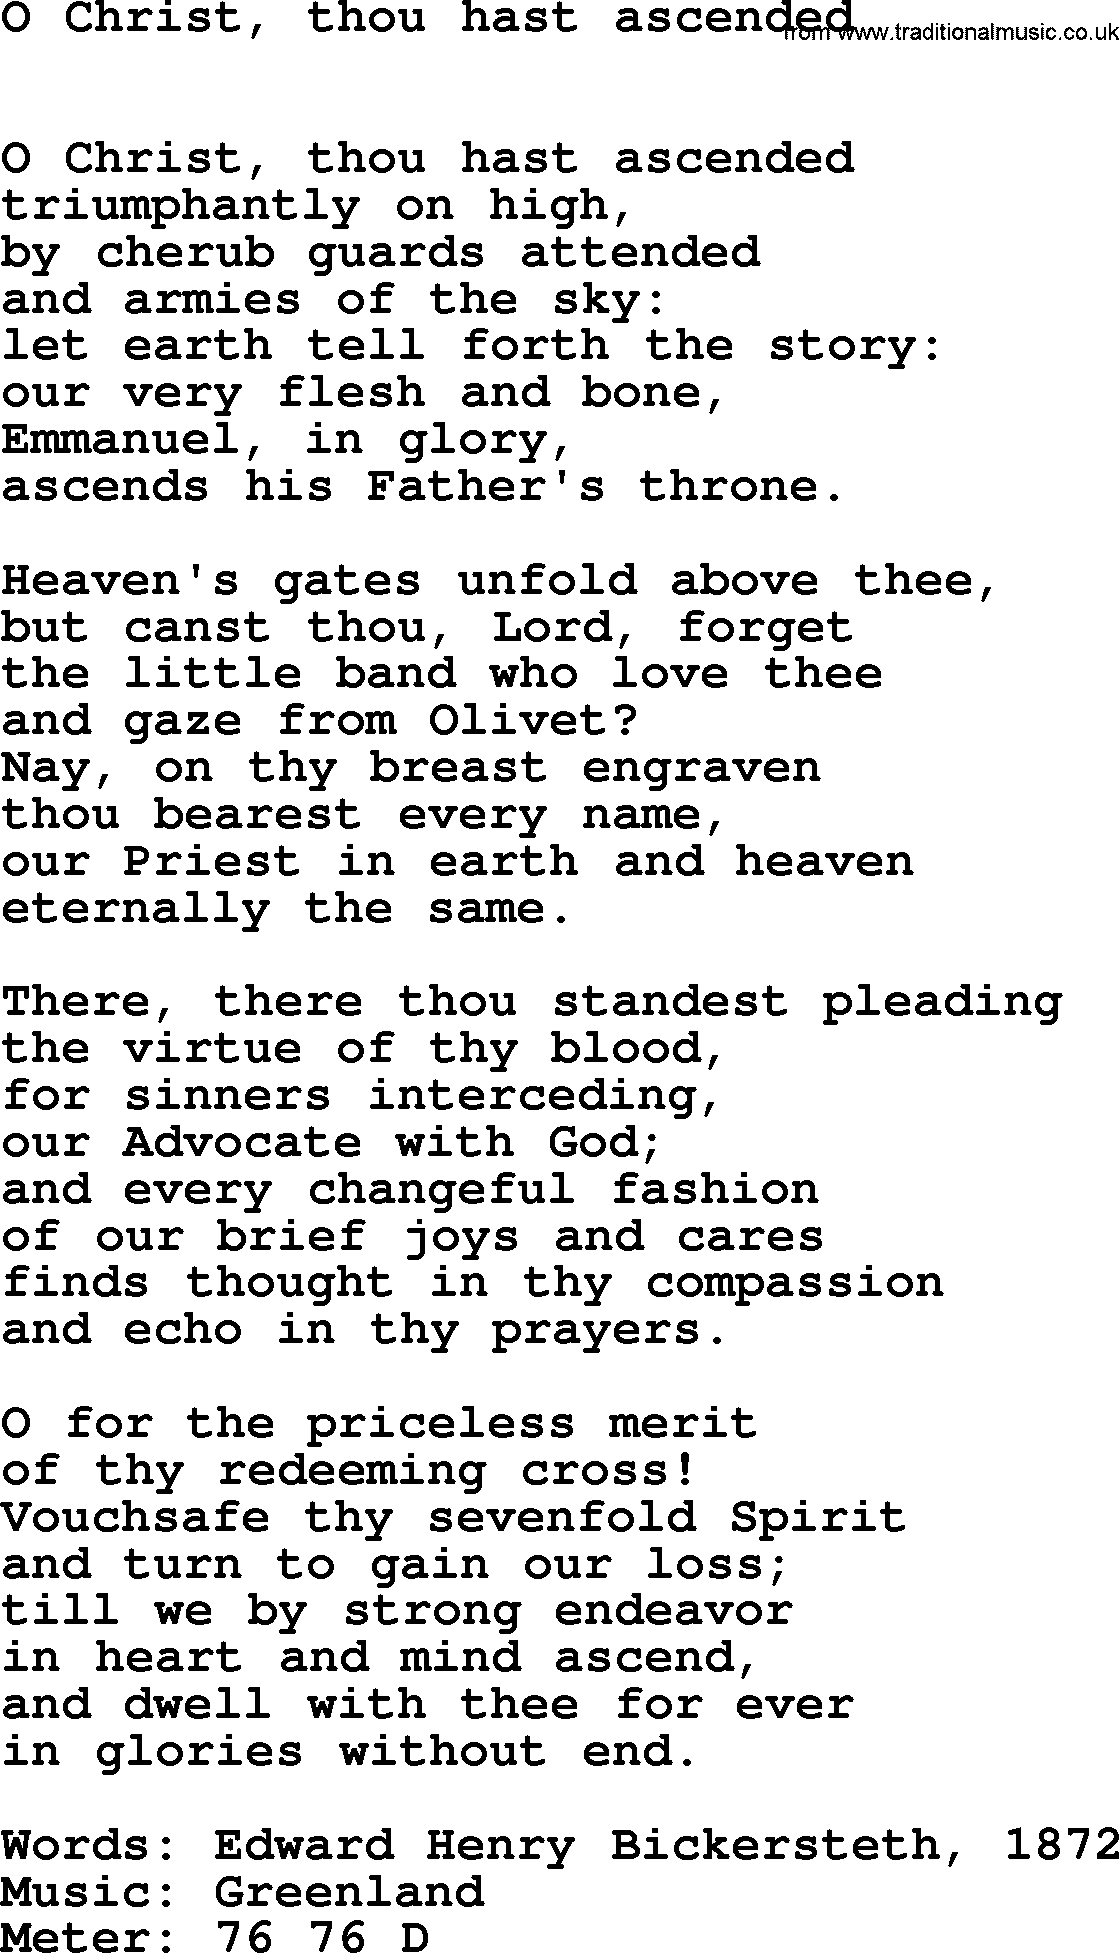 Book of Common Praise Hymn: O Christ, Thou Hast Ascended.txt lyrics with midi music